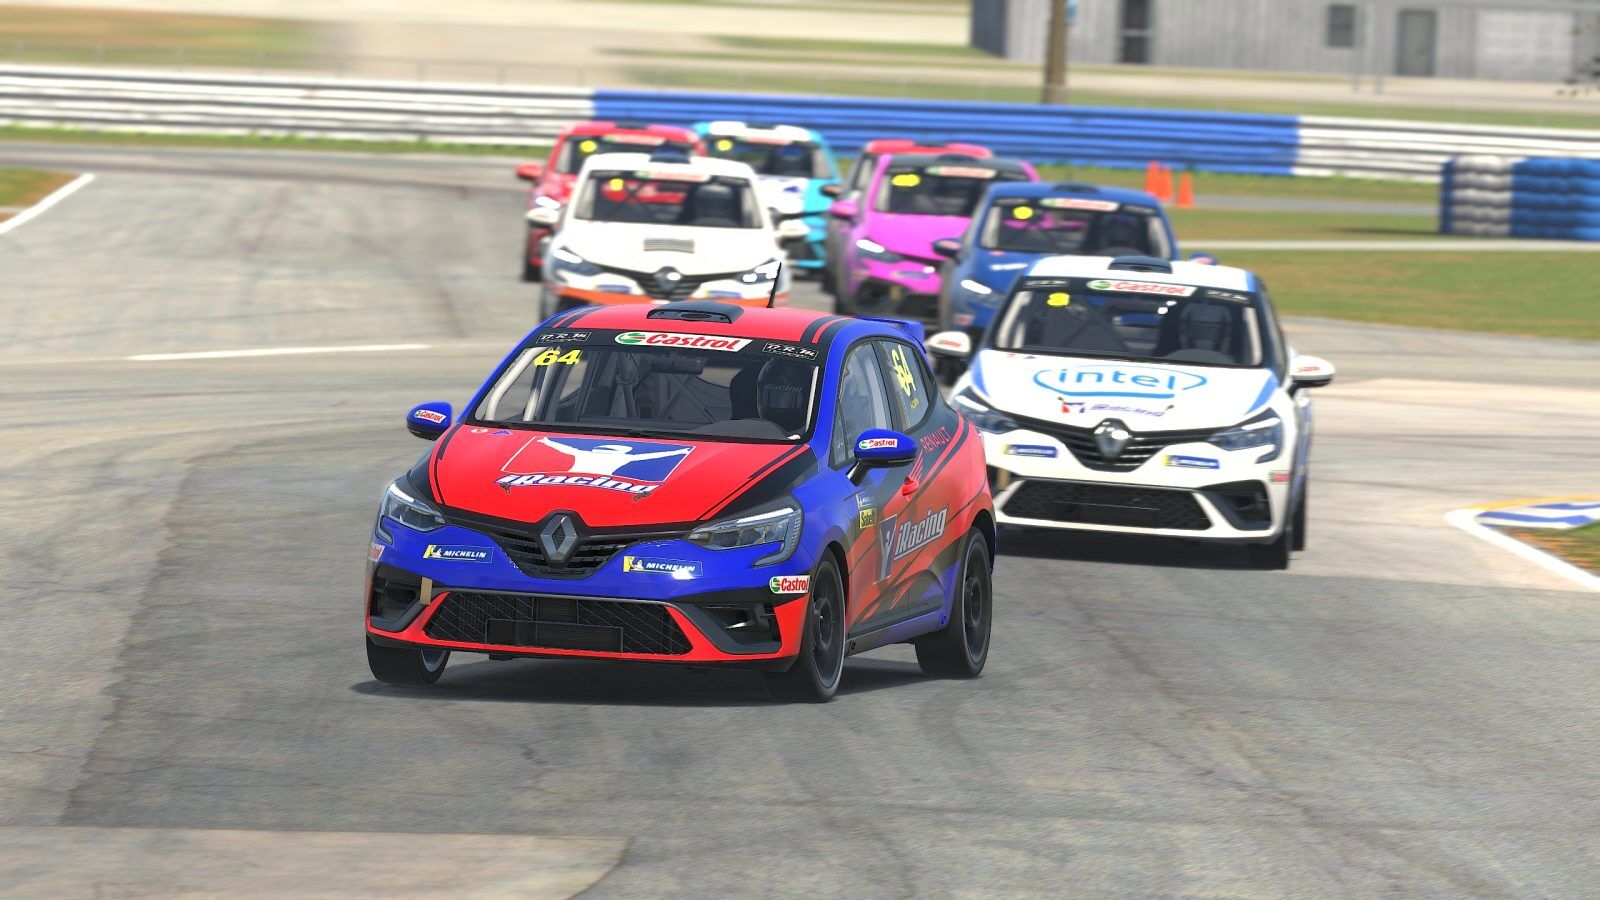 Renault Clio cup joins iRacing in Season 2